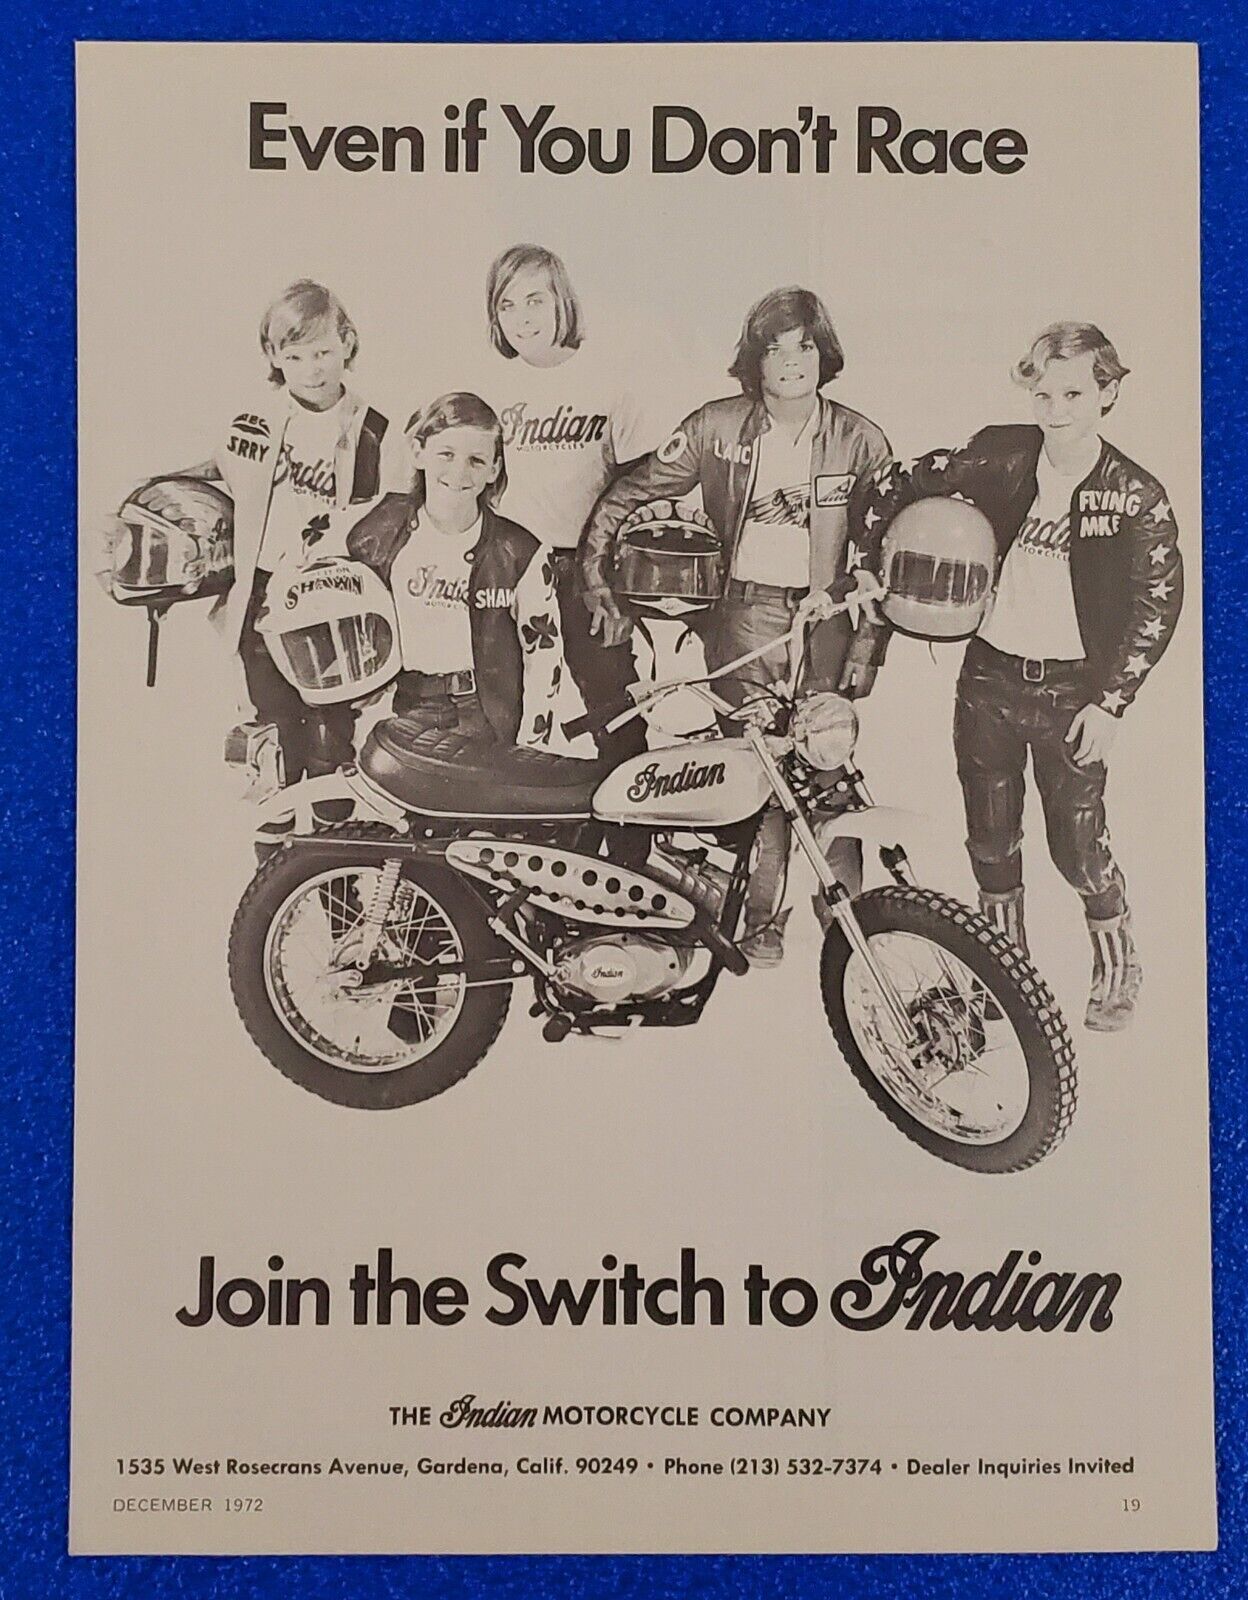 1972 INDIAN MOTORCYCLE ORIGINAL PRINT AD MINIBIKE - JOIN THE SWITCH TO INDIAN